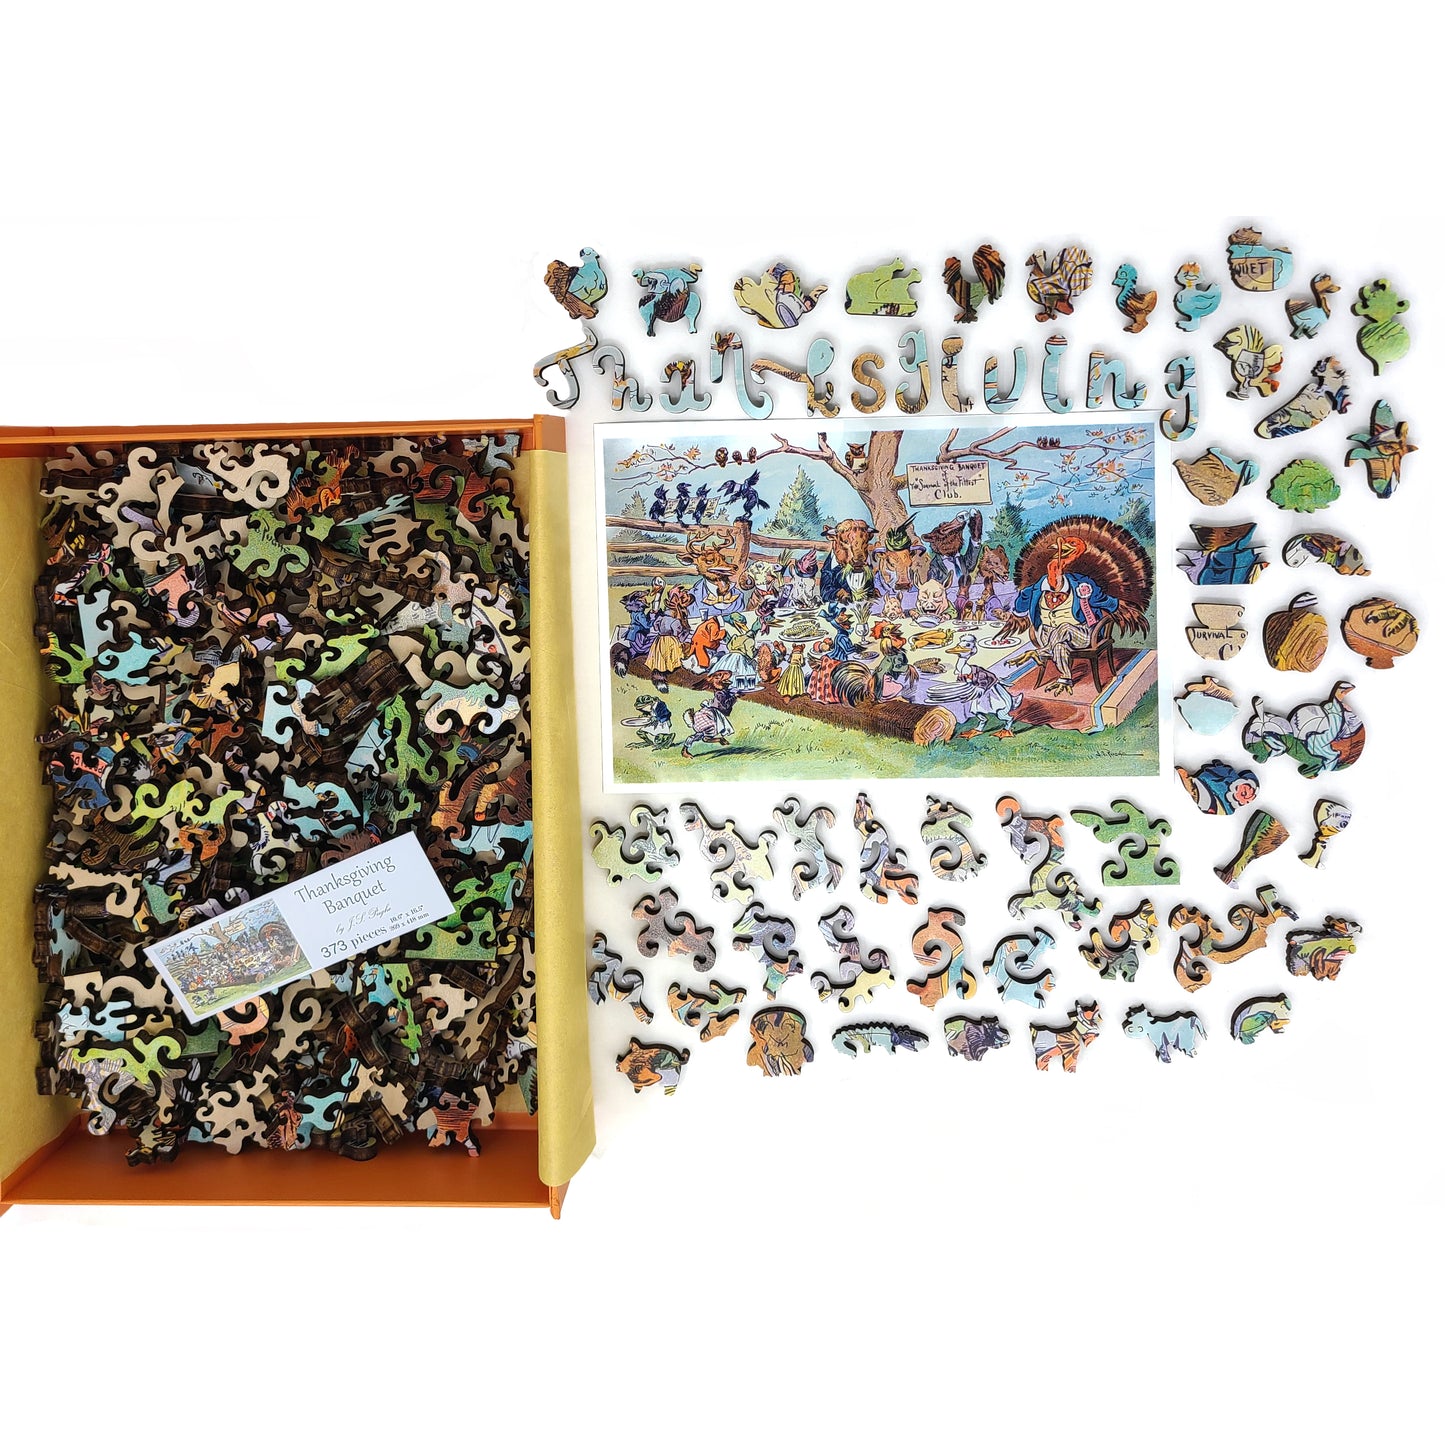 Wooden Jigsaw Puzzle with Uniquely Shaped Pieces for Adults - 373 Pieces - Thanksgiving Banquet